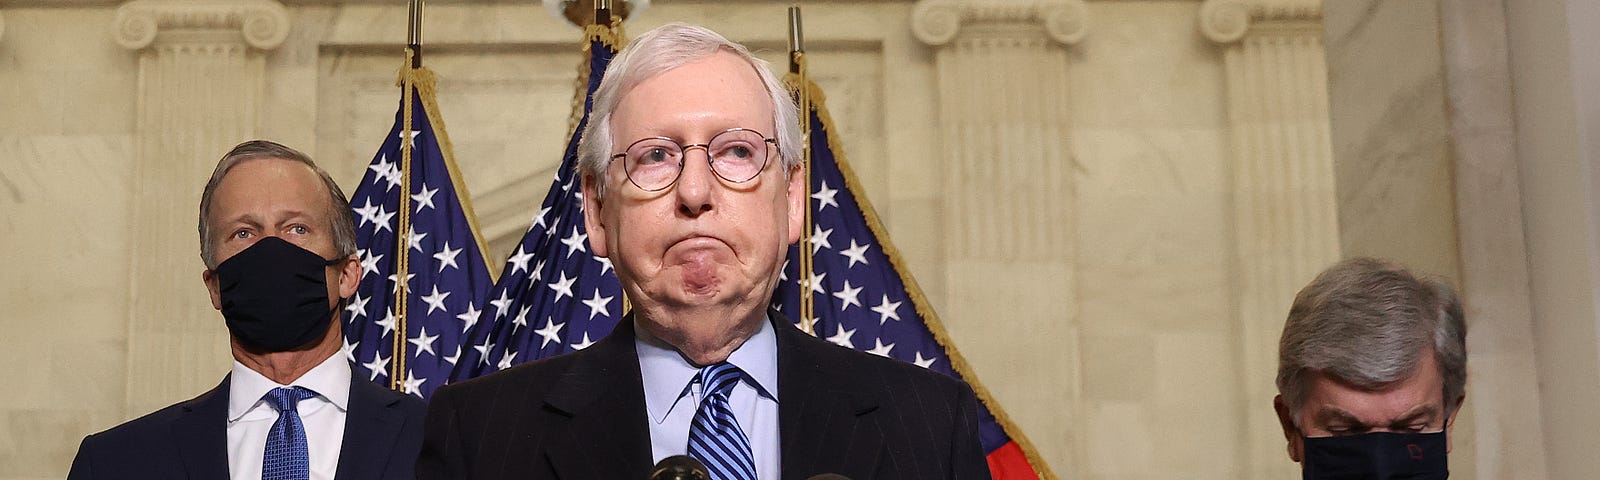 Mitch McConnell speaking into a mic.